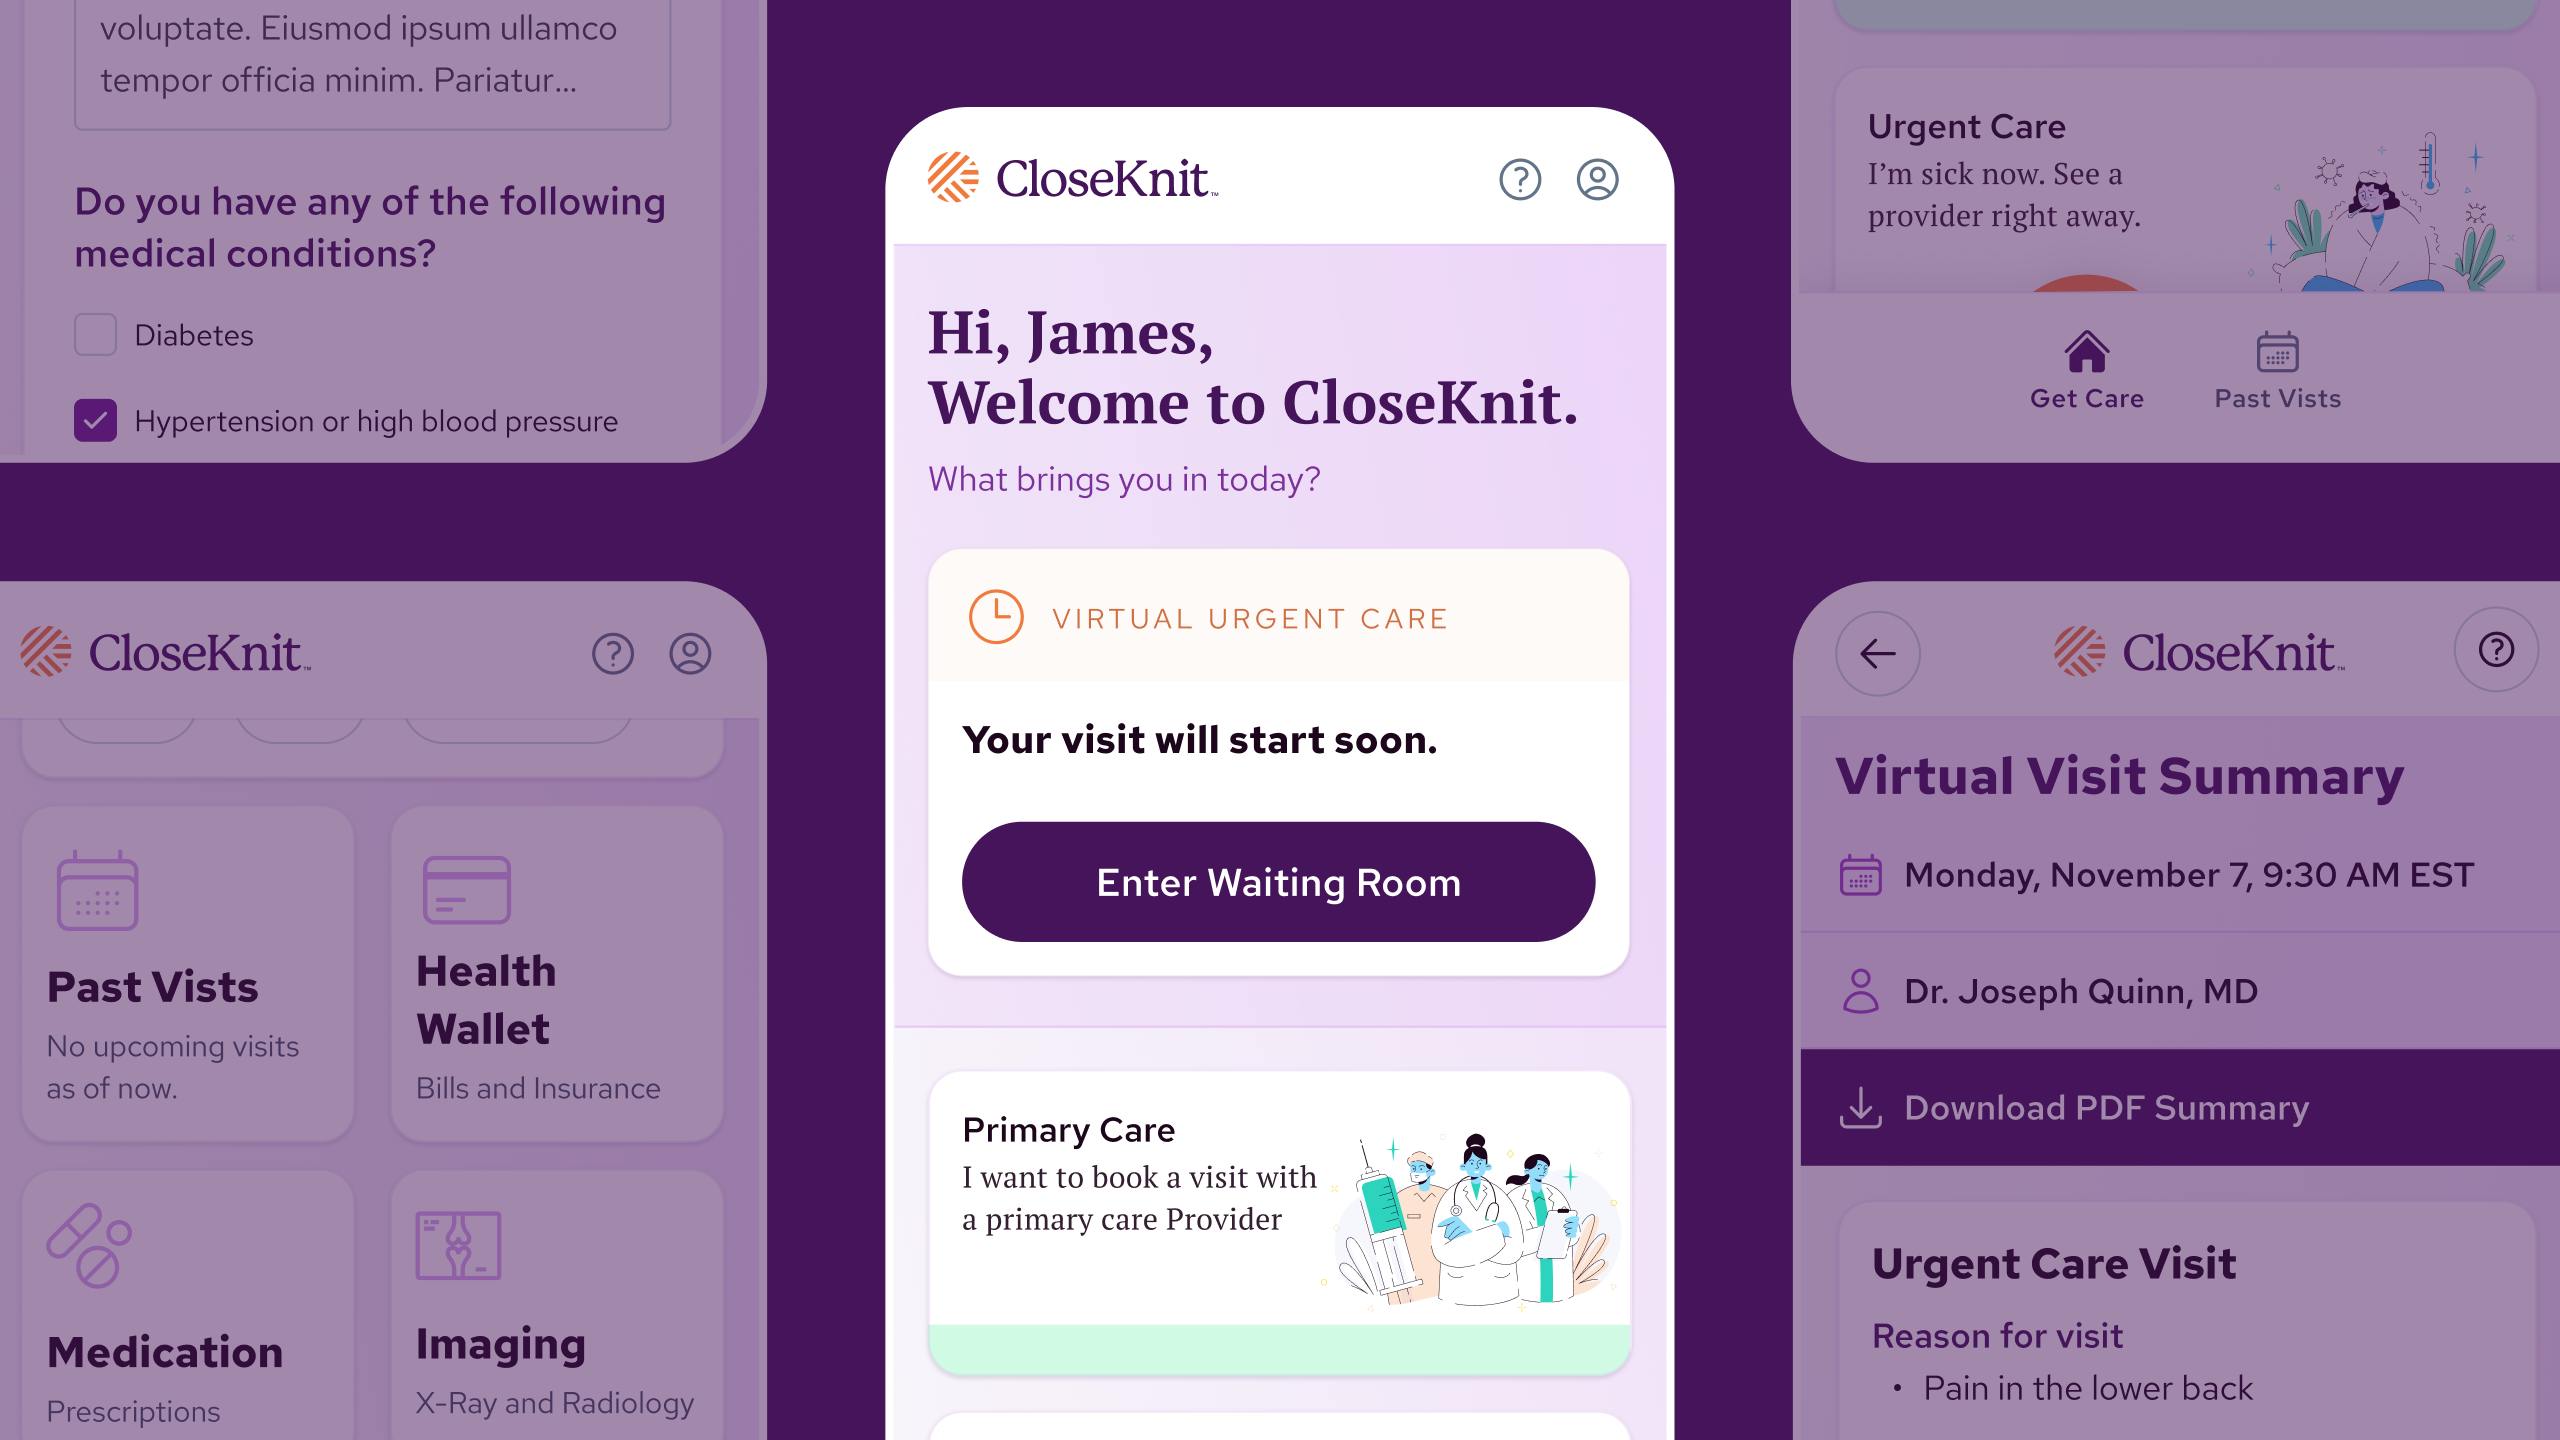 Screenshots of the CloseKnit application on a mobile screen size. The main screenshot says "Hi James, Welcome to CloseKnit" and has an virtual visit care reminder with a button to enter the waiting room.